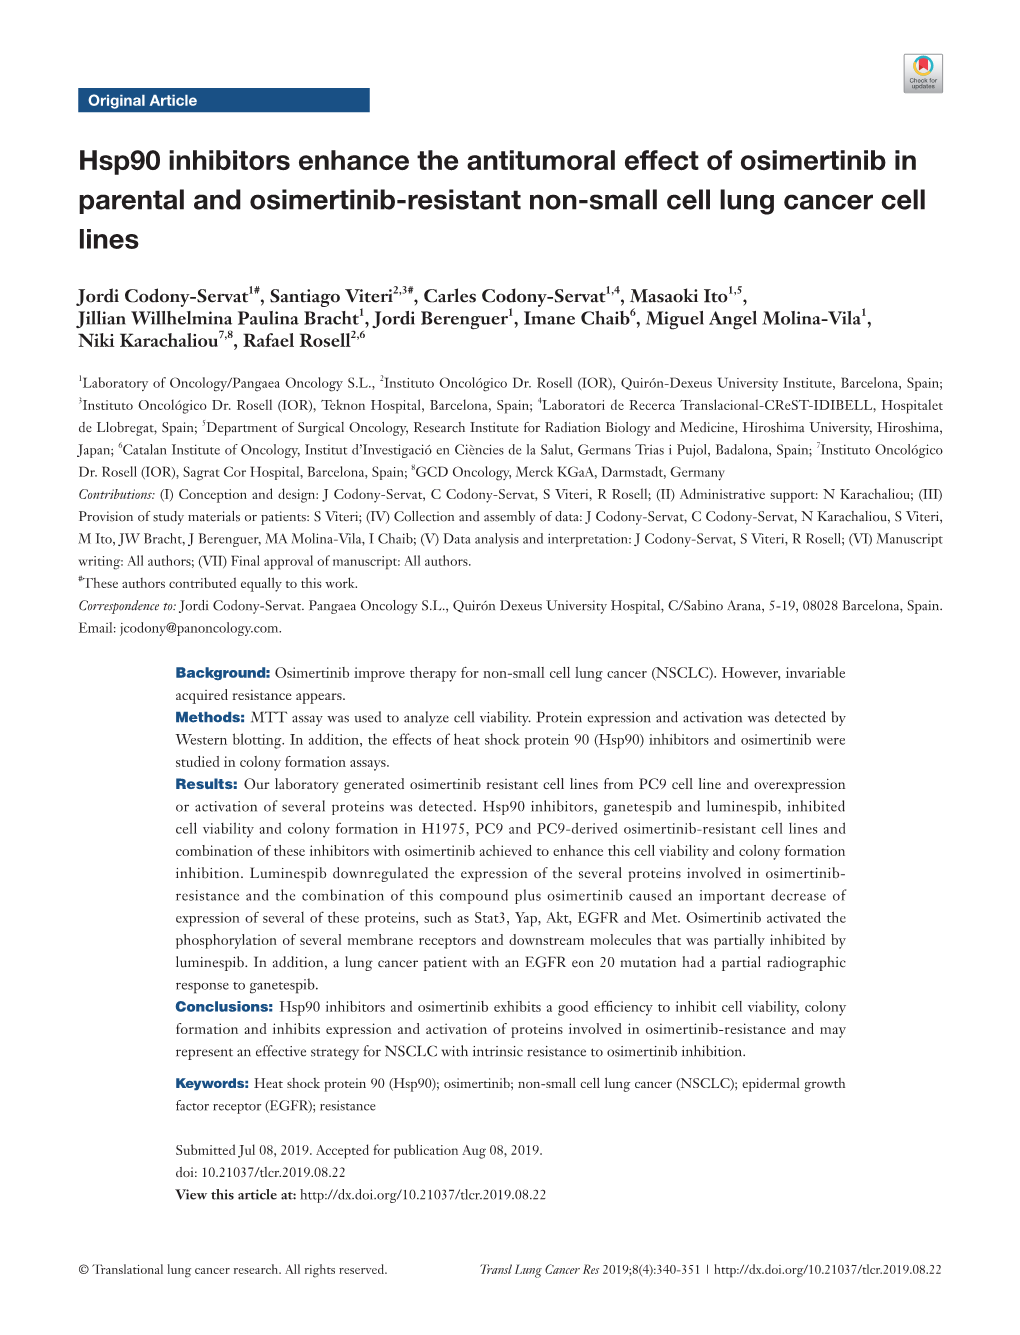 Hsp90 Inhibitors Enhance the Antitumoral Effect of Osimertinib in Parental and Osimertinib-Resistant Non-Small Cell Lung Cancer Cell Lines